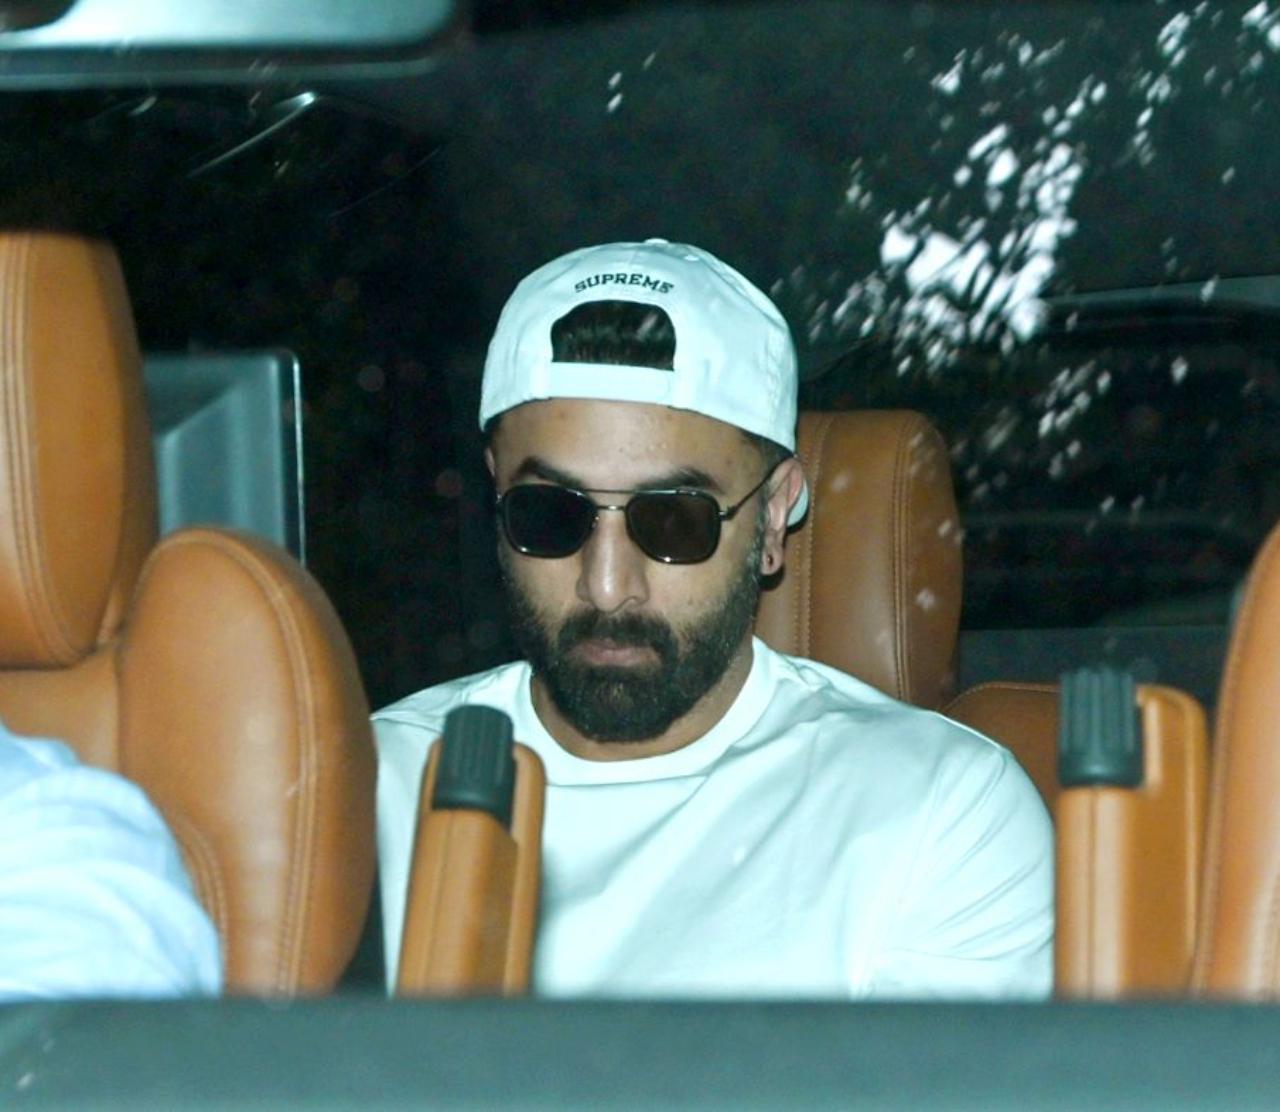 Bandra seems to have been a celebrity hotspot today! Superstar Ranbir Kapoor was spotted at a salon in the neighbourhood - perhaps some grooming for his upcoming film, 'Animal'?